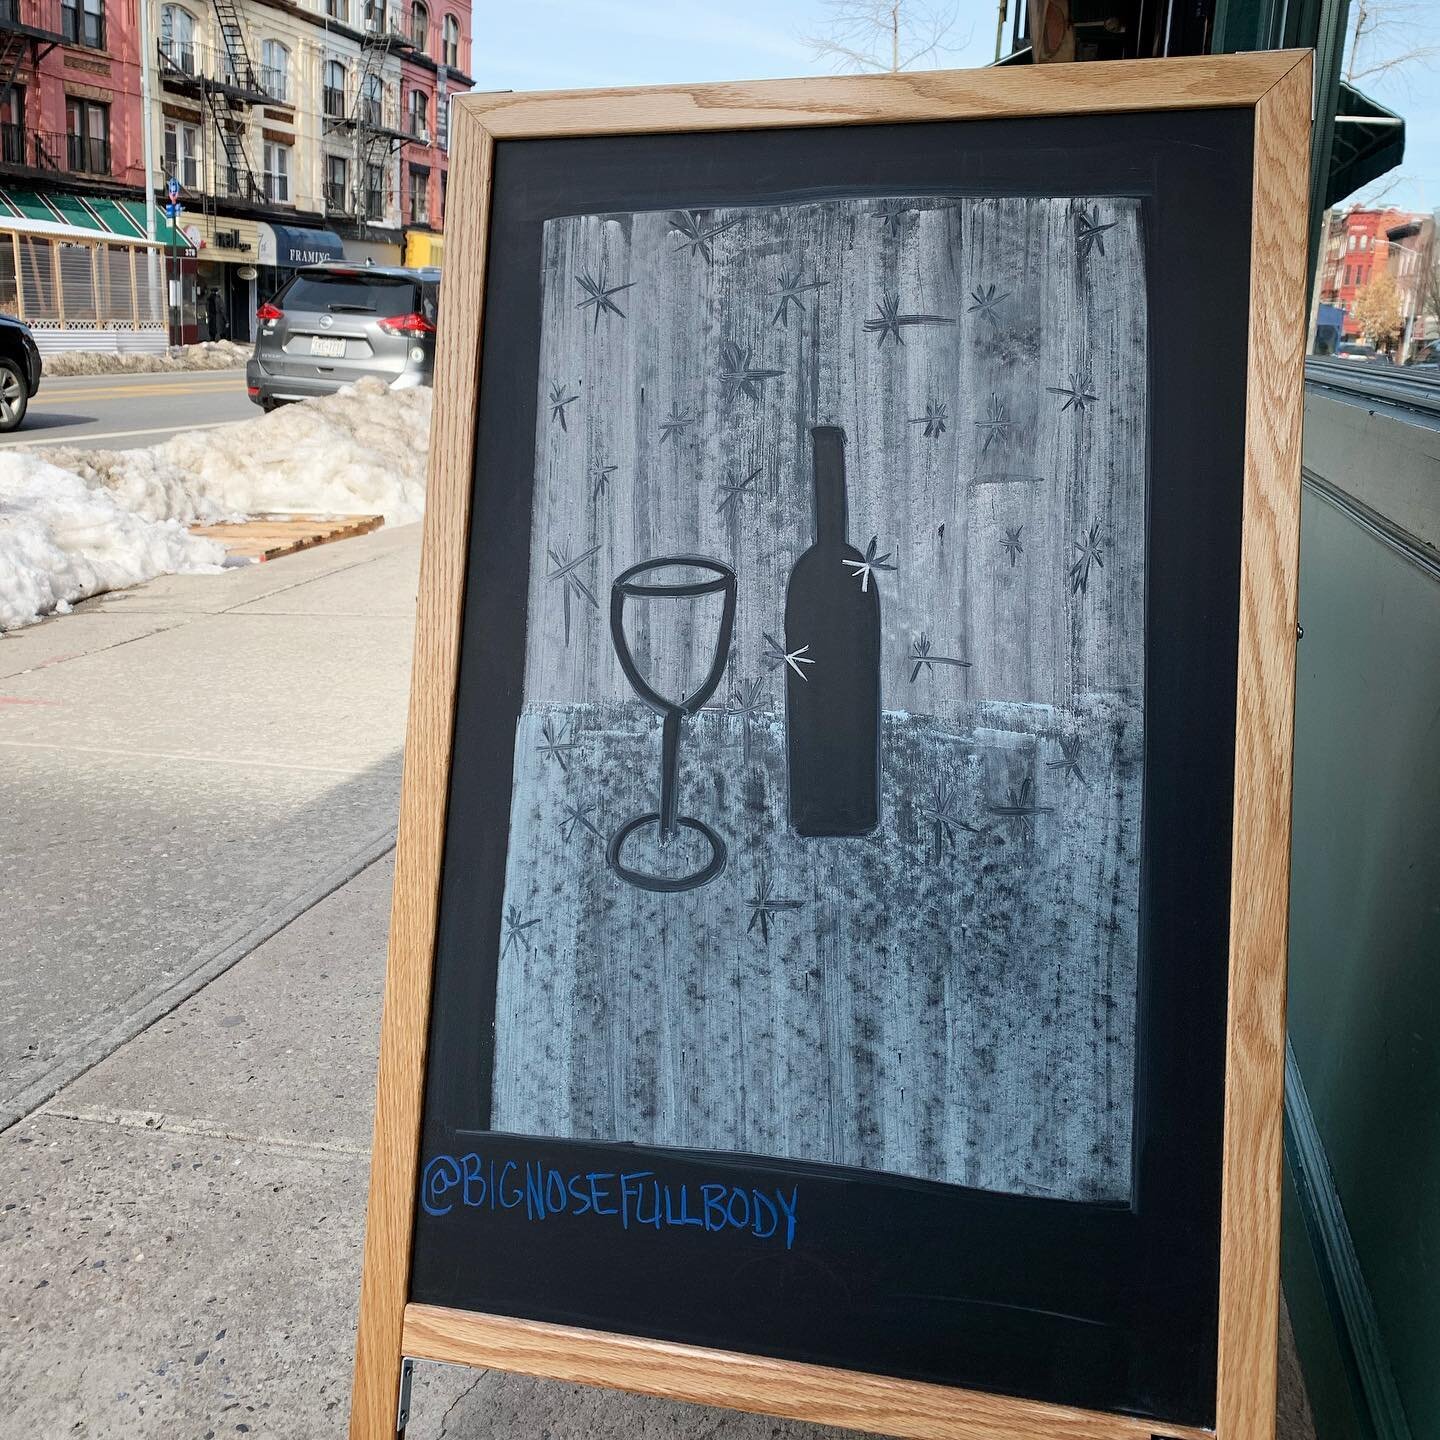 It&rsquo;s looking like a three-peat with more snow on the docket for tomorrow. We&rsquo;ve got plenty of new selections to stock up on. 

Come on in or order online for delivery at bignosefullbody.com

#bignosefullbody #winesign #chalkboardart #broo